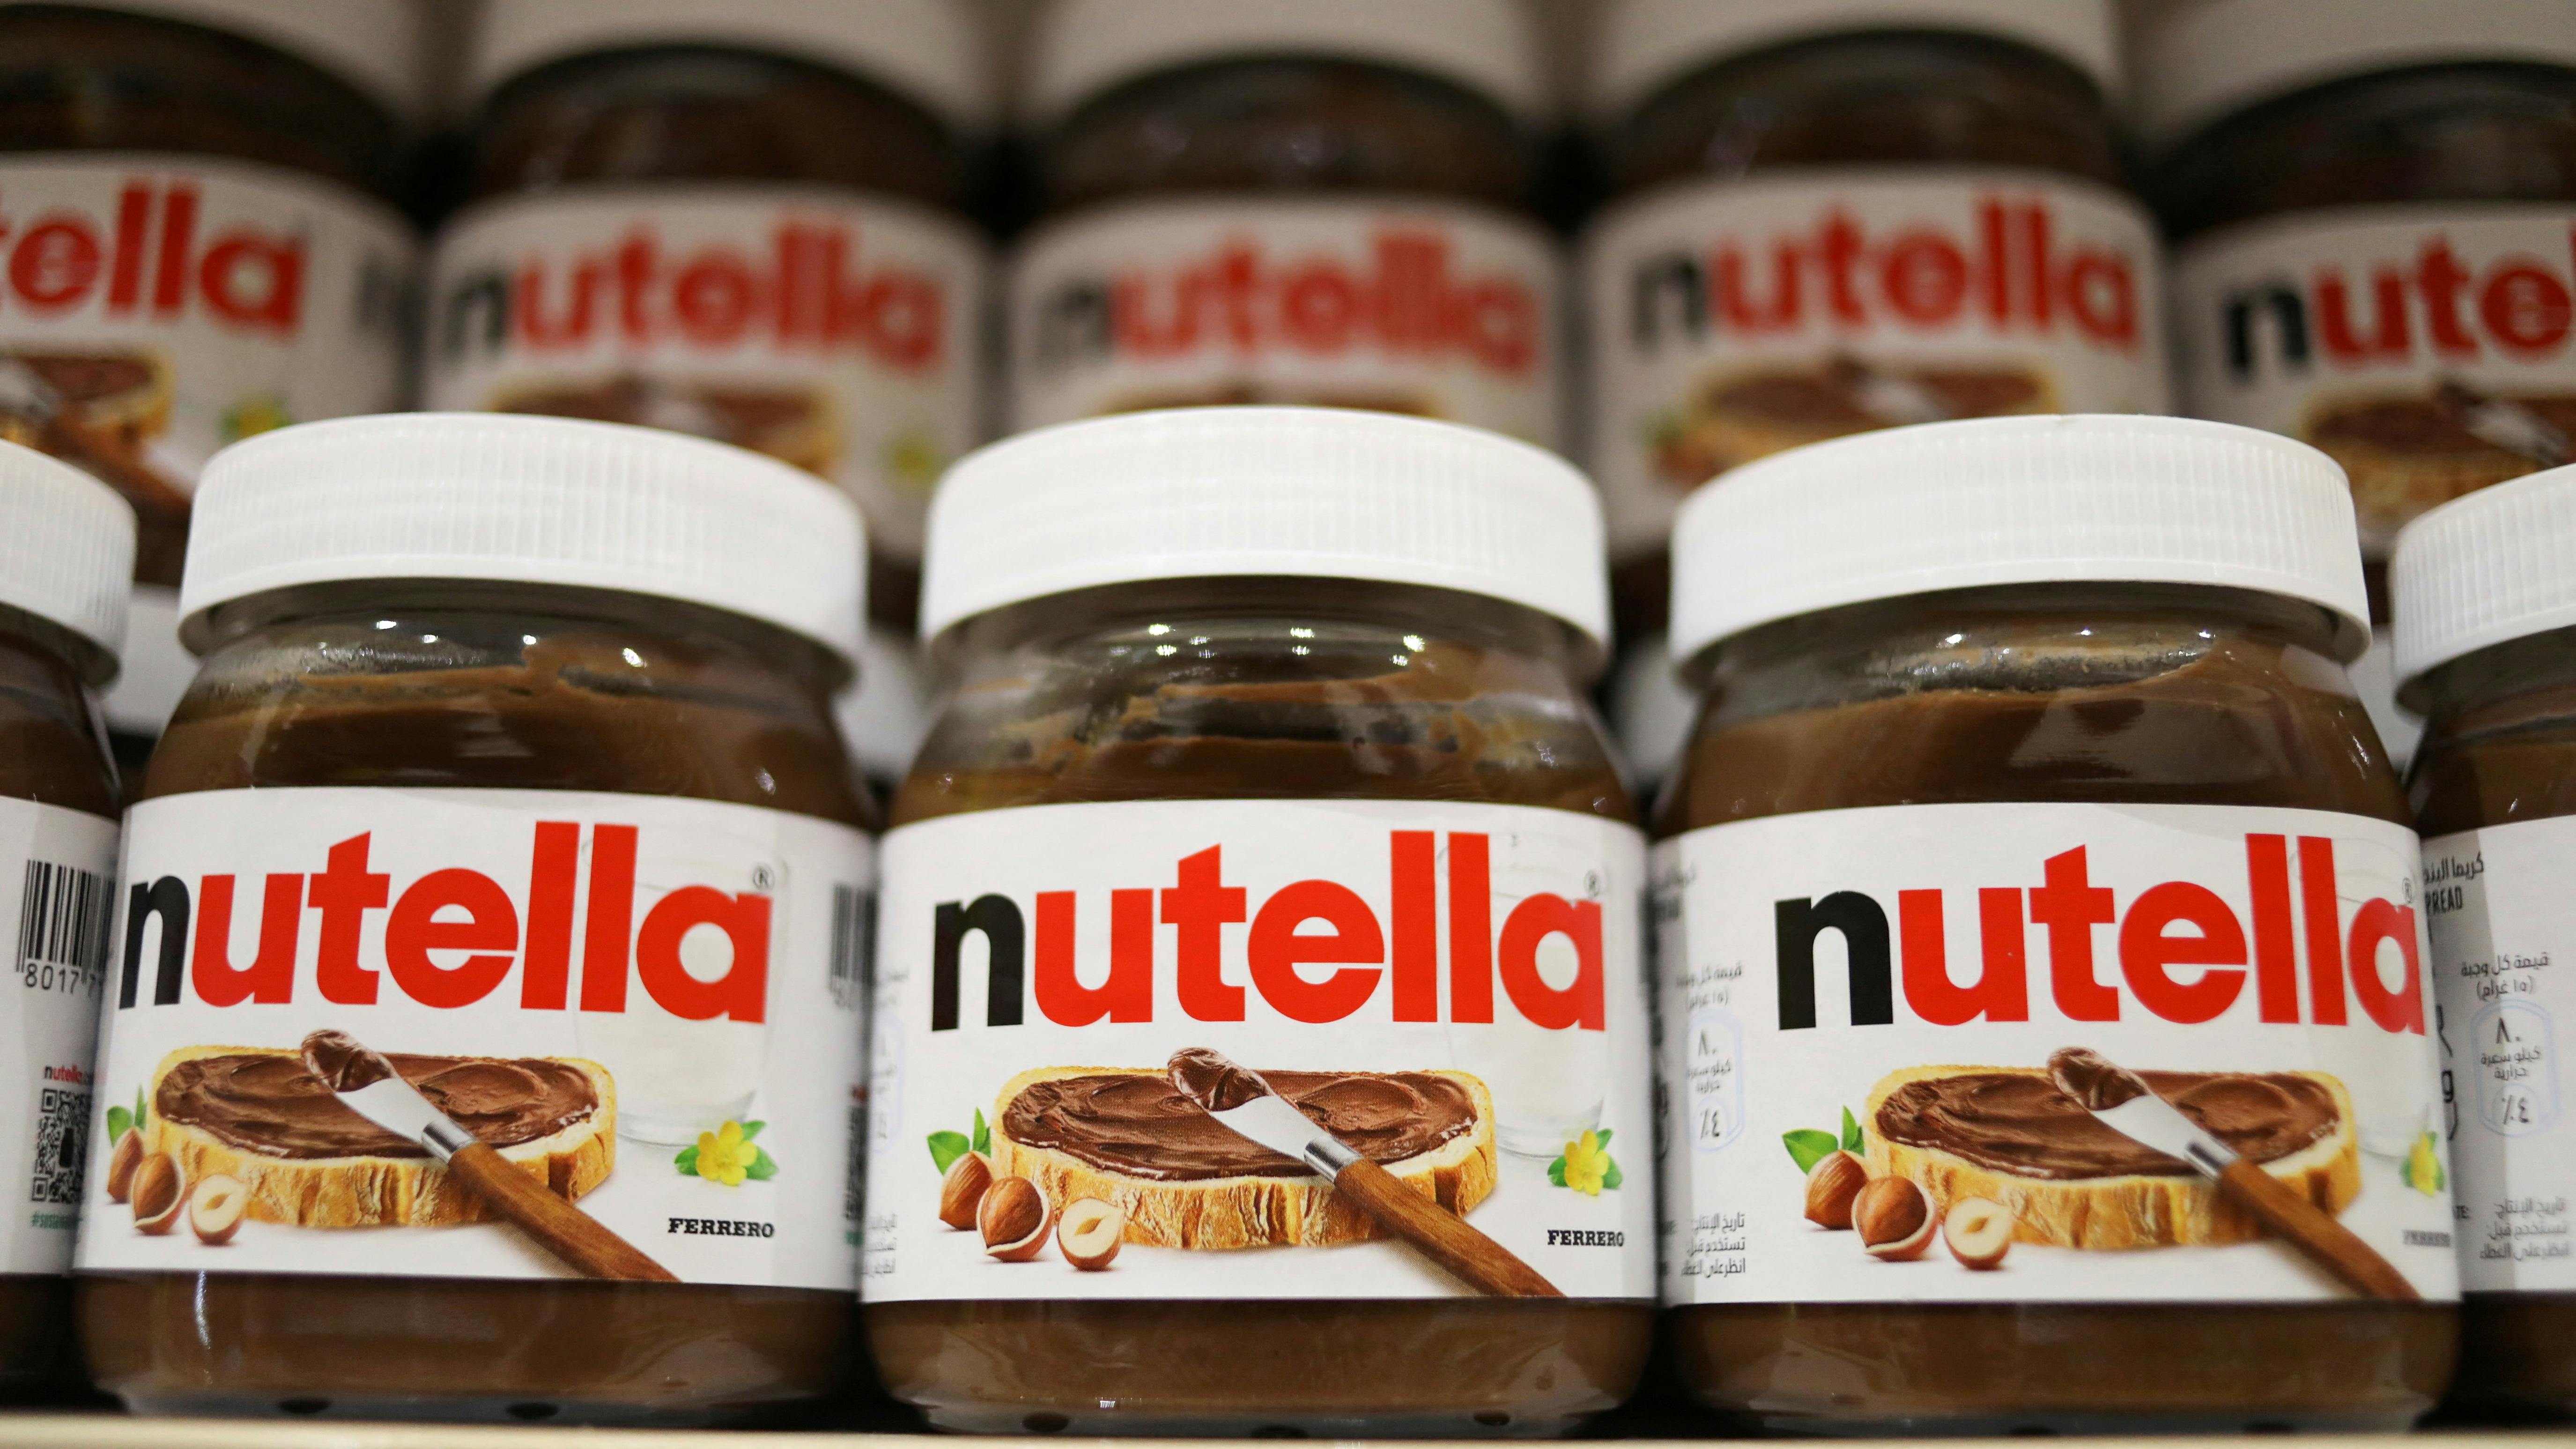 FILE PHOTO: Jars of Nutella spread produced by Italian confectionary maker Ferrero are displayed at a supermarket's shelf in Subang Jaya, Malaysia, April 14, 2022. Picture taken April 14, 2022. REUTERS/Hasnoor Hussain/File Photo